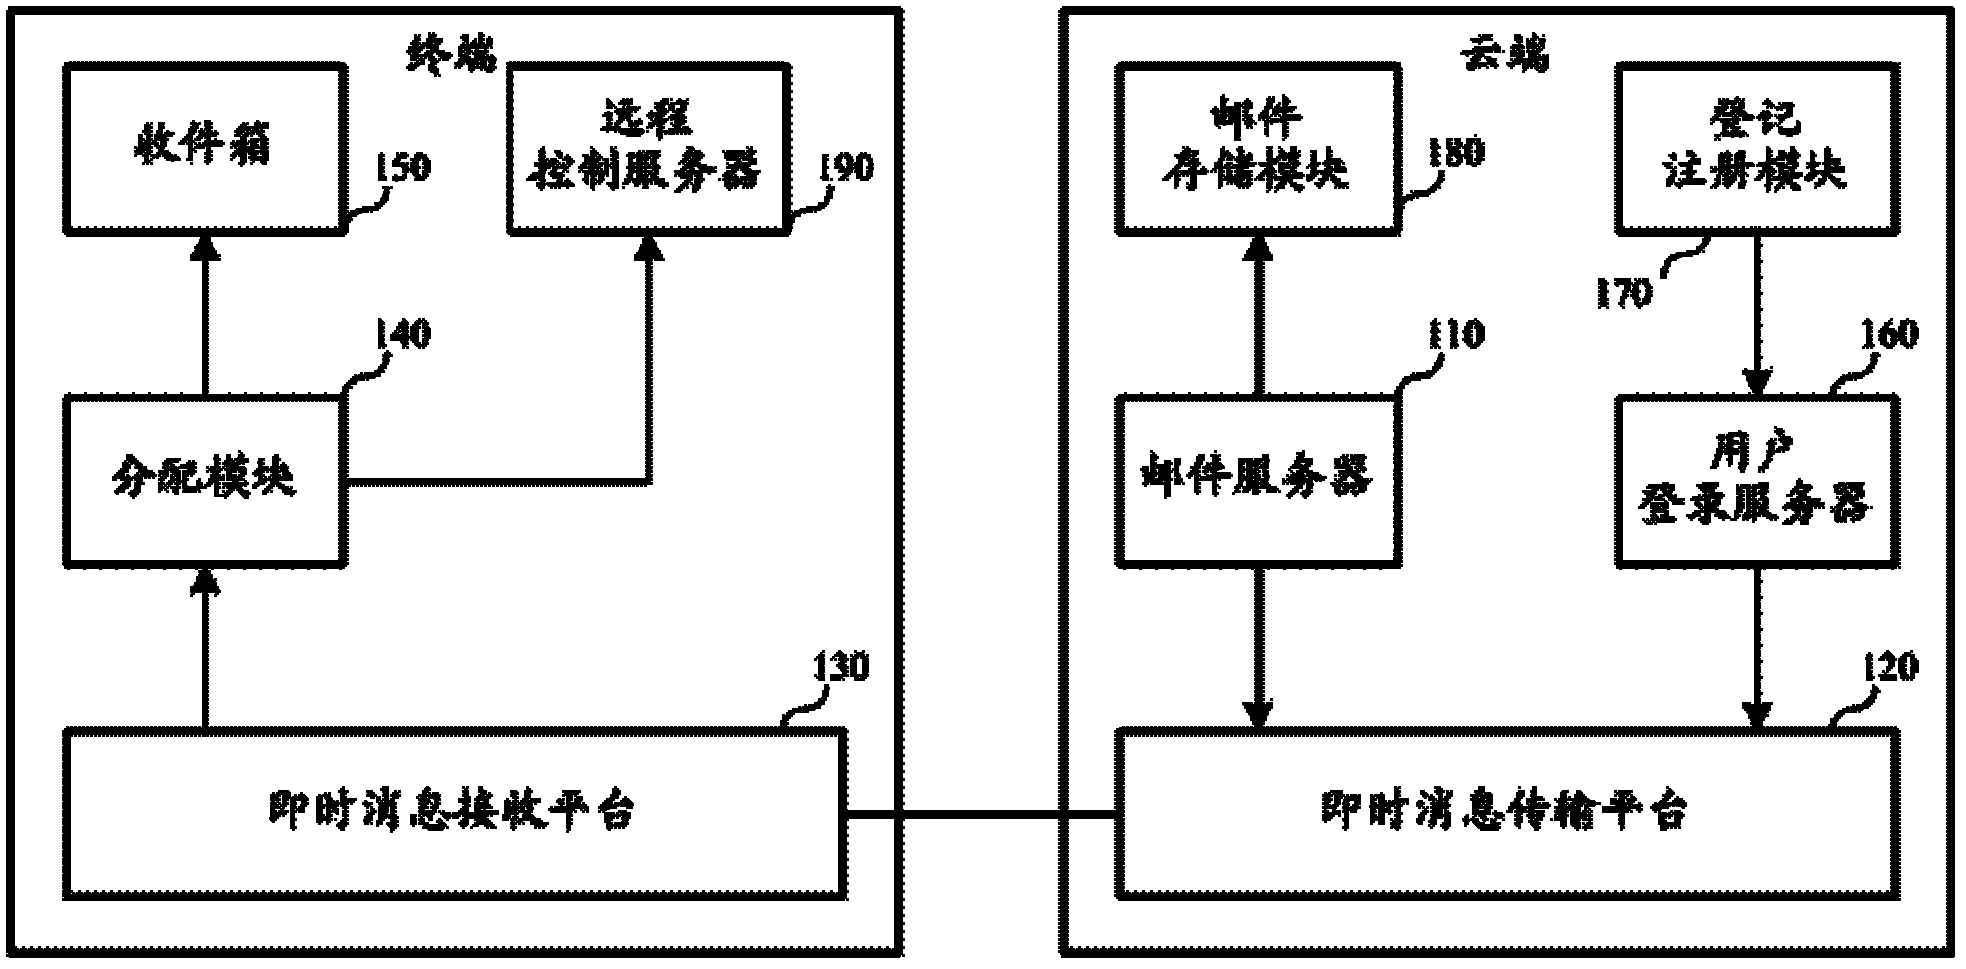 E-mail receiving system